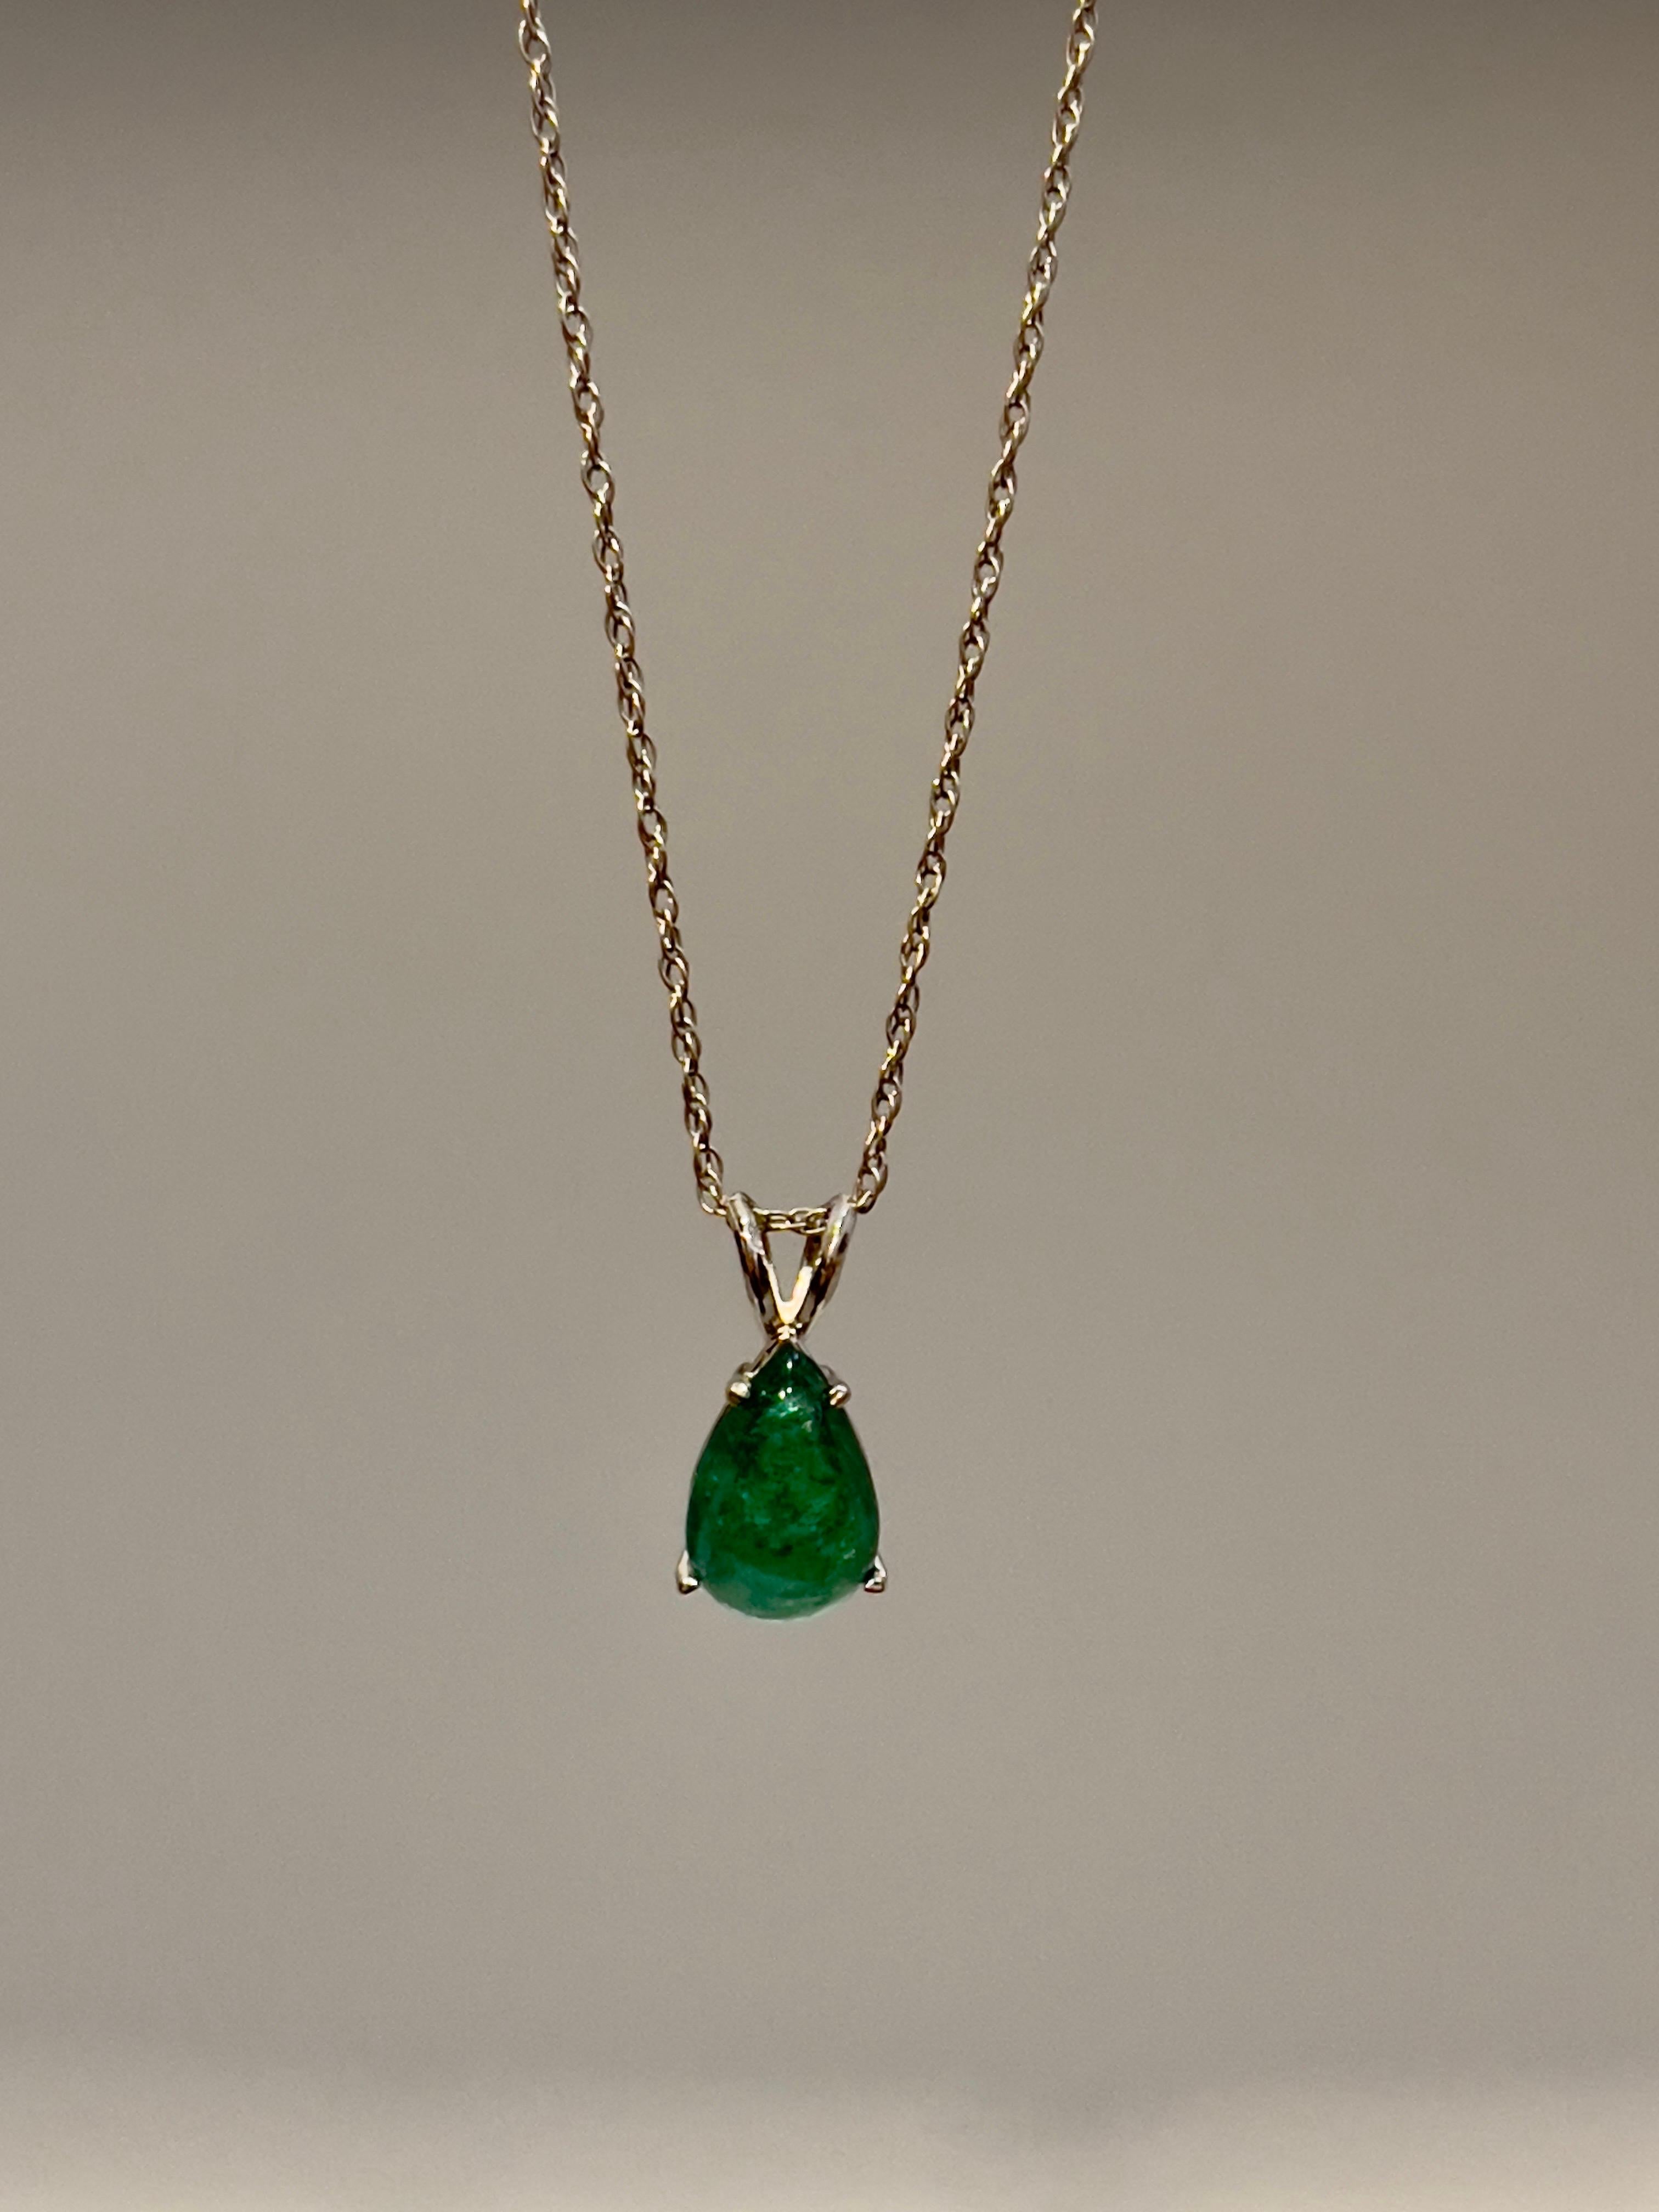 Approximately 5 Ct Natural Emerald Zambia Cabochon  Pendant 14 Karat White Gold Chain

 Emerald is about 5 carat 
Very desirable color and quality. Extreme fine color and clarity.
comes  in  a 14 Karat White gold chain
Emerald origin is